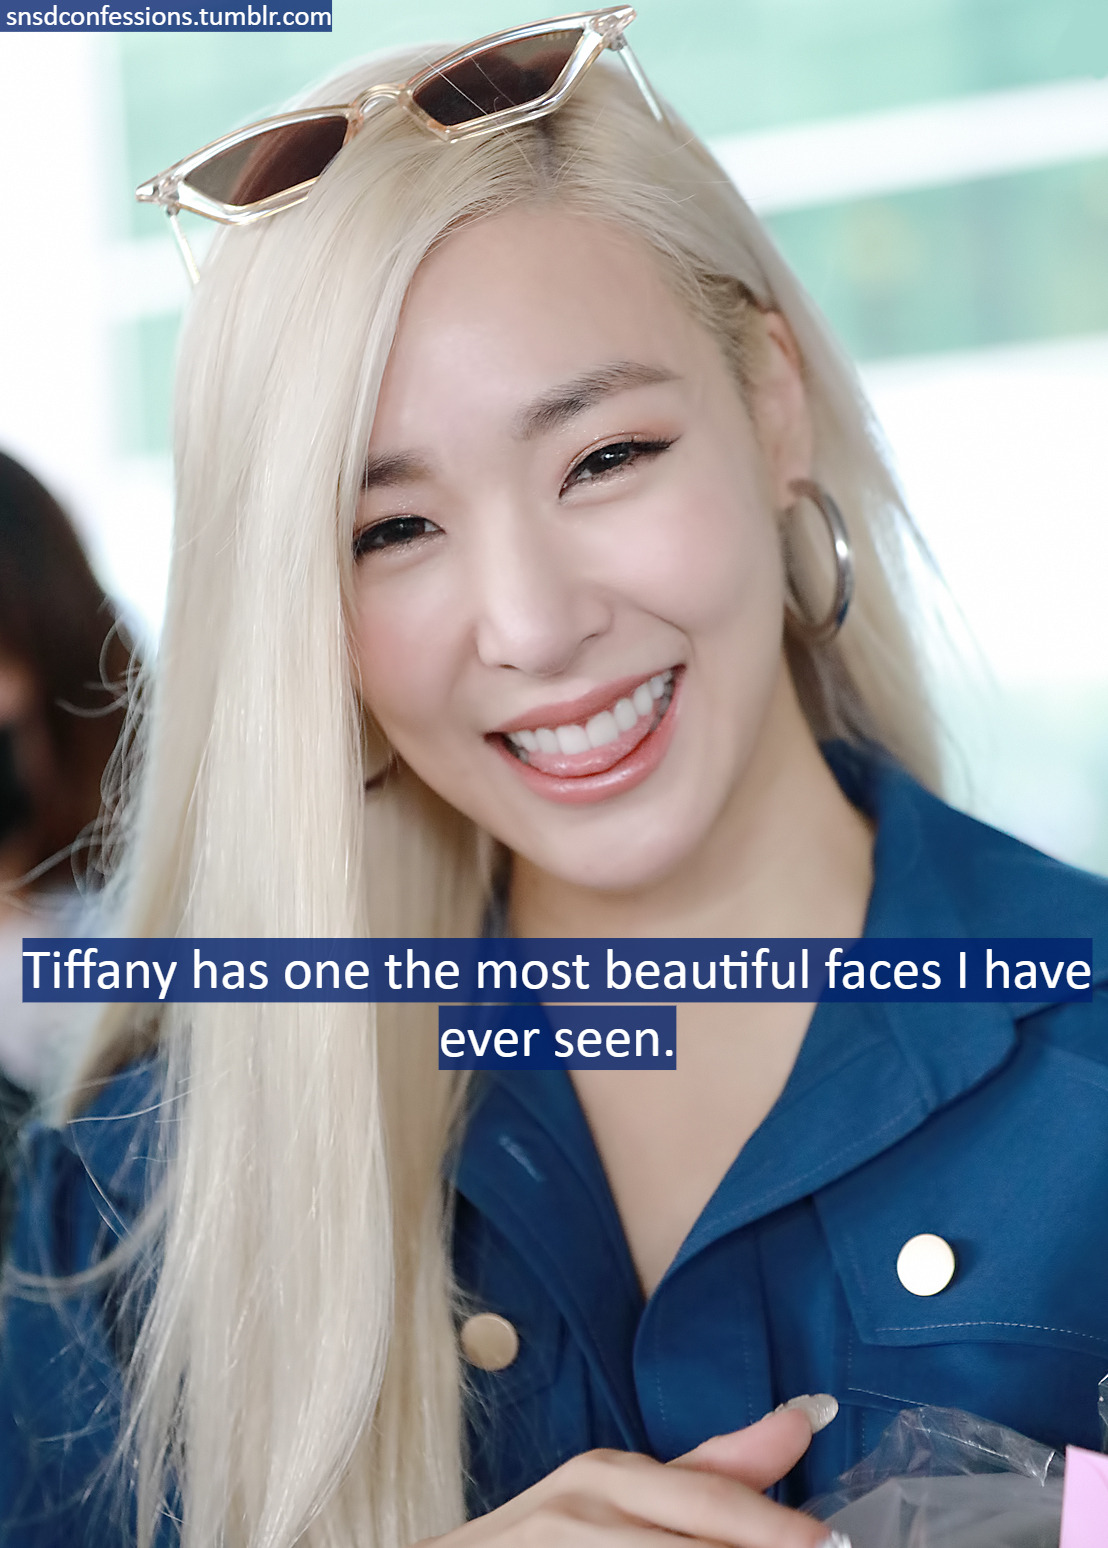 Tiffany has one the most beautiful faces I have ever seen.